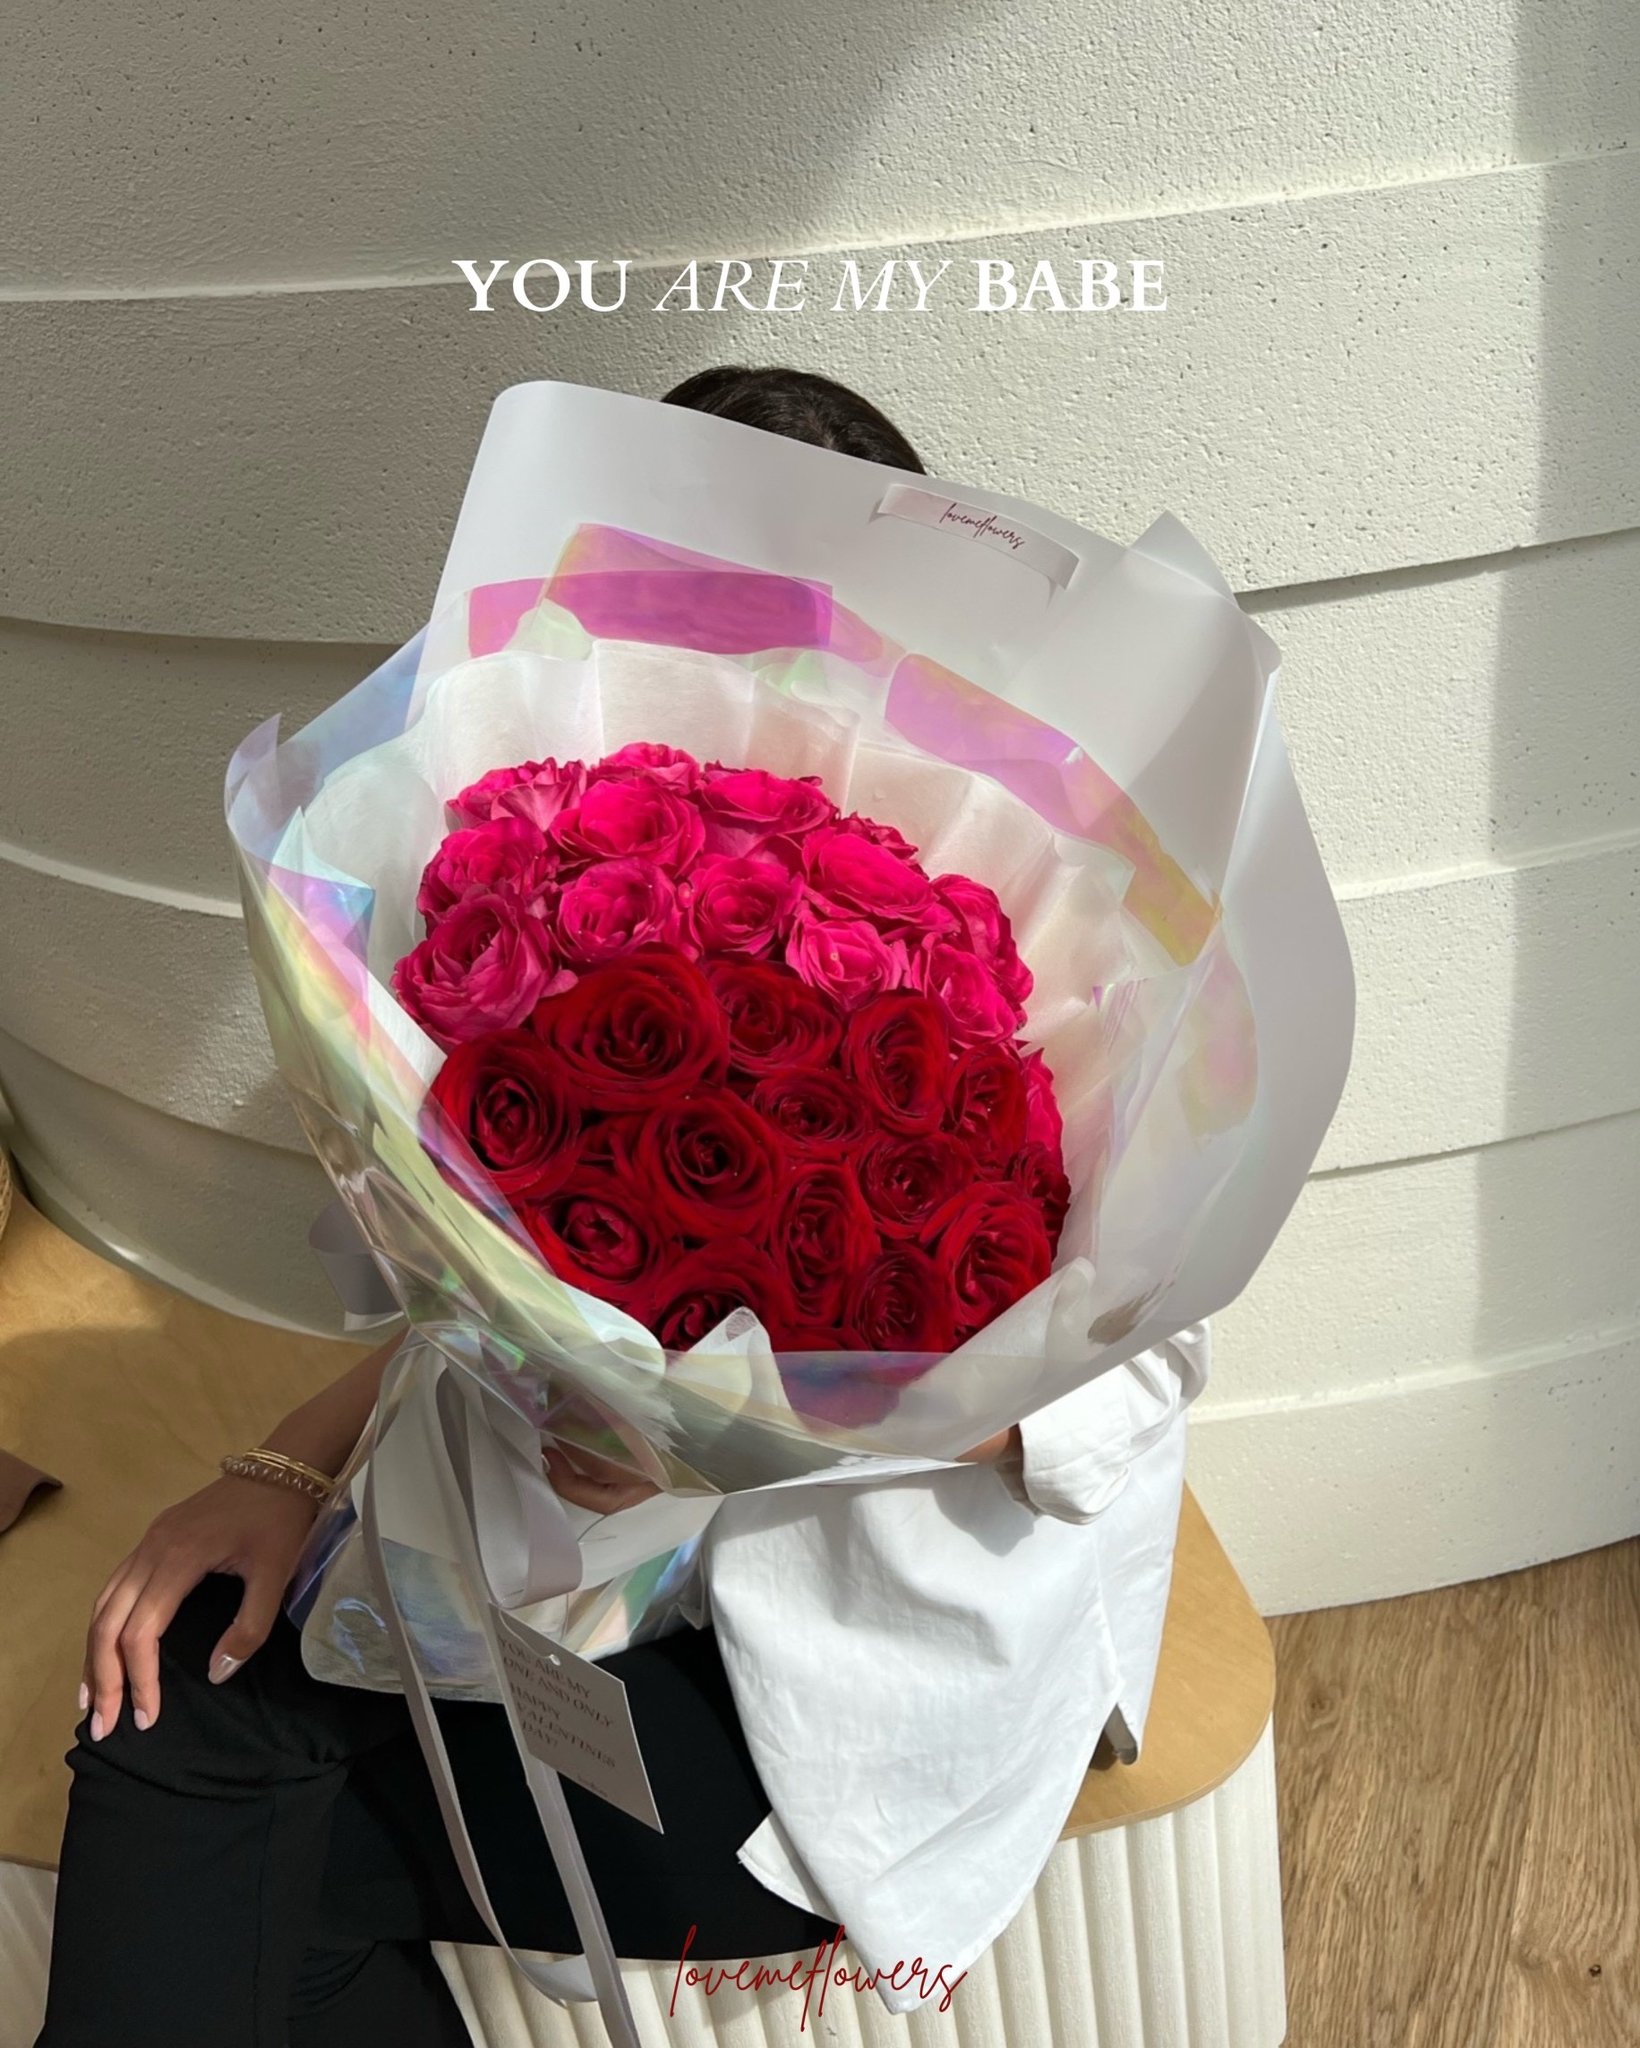 YOU ARE MY BABE bouquet